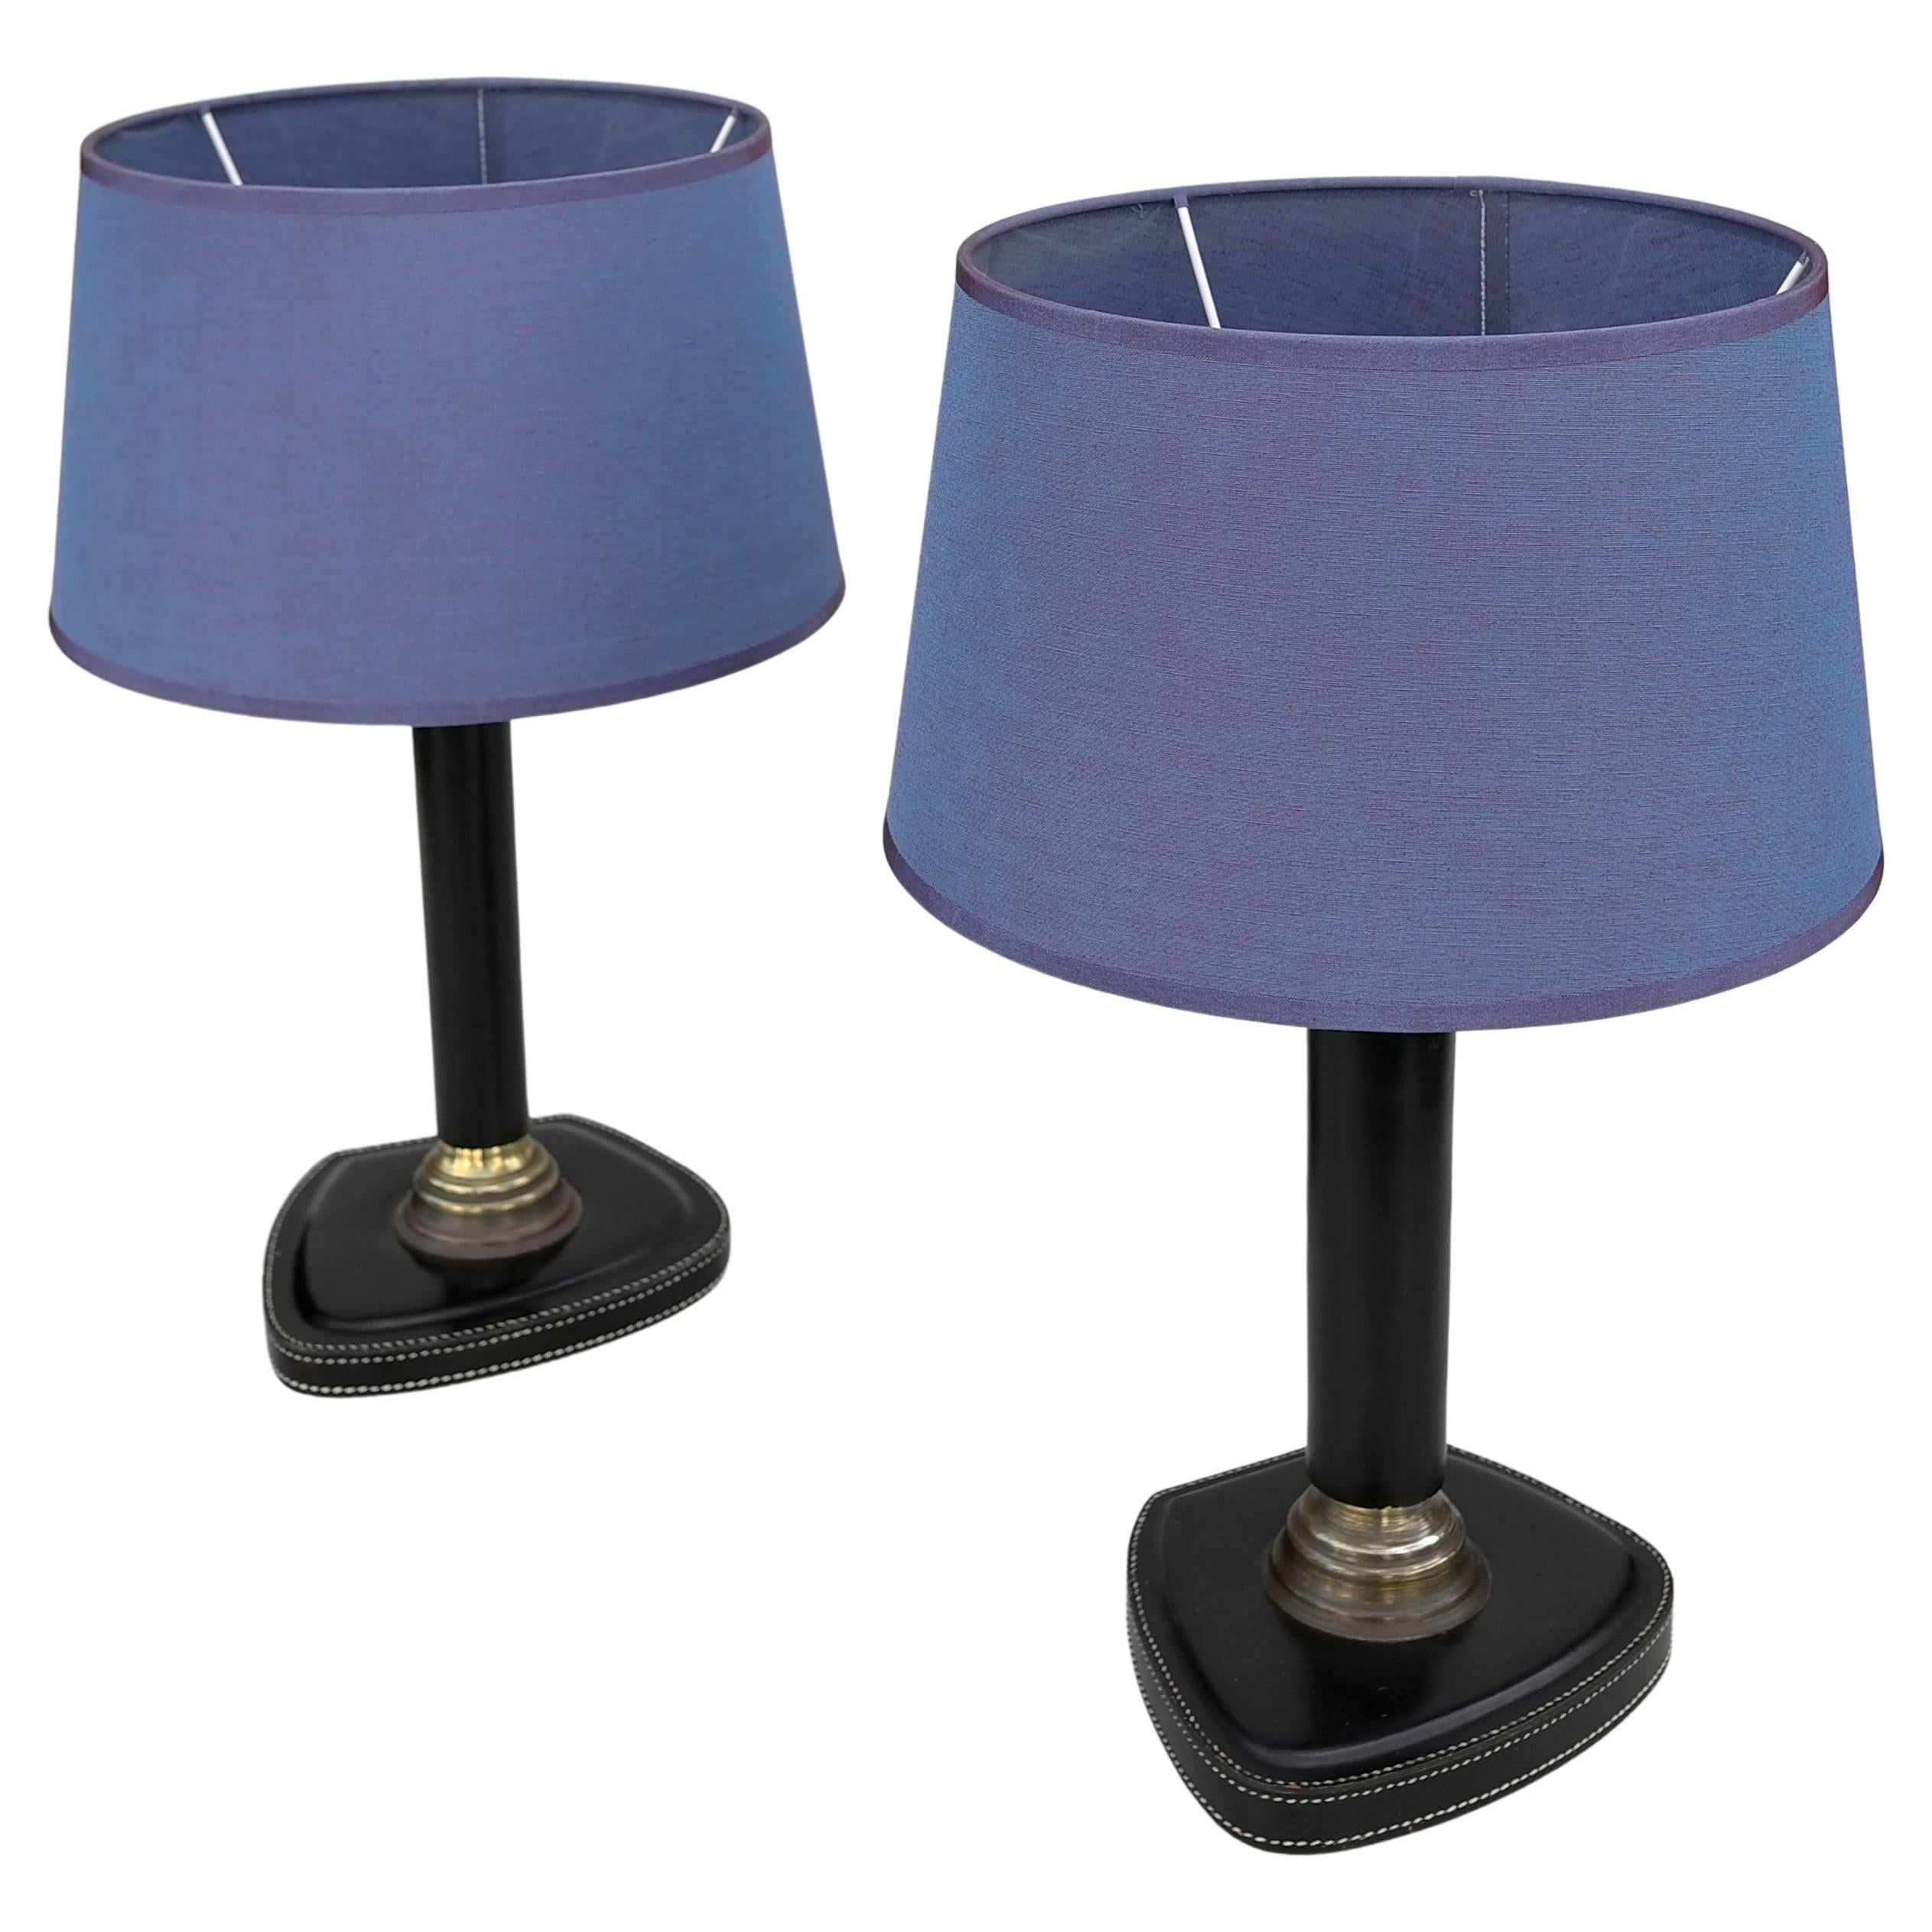 Pair of Hand-Stitched Black Leather Table Lamps, France, 1960s For Sale